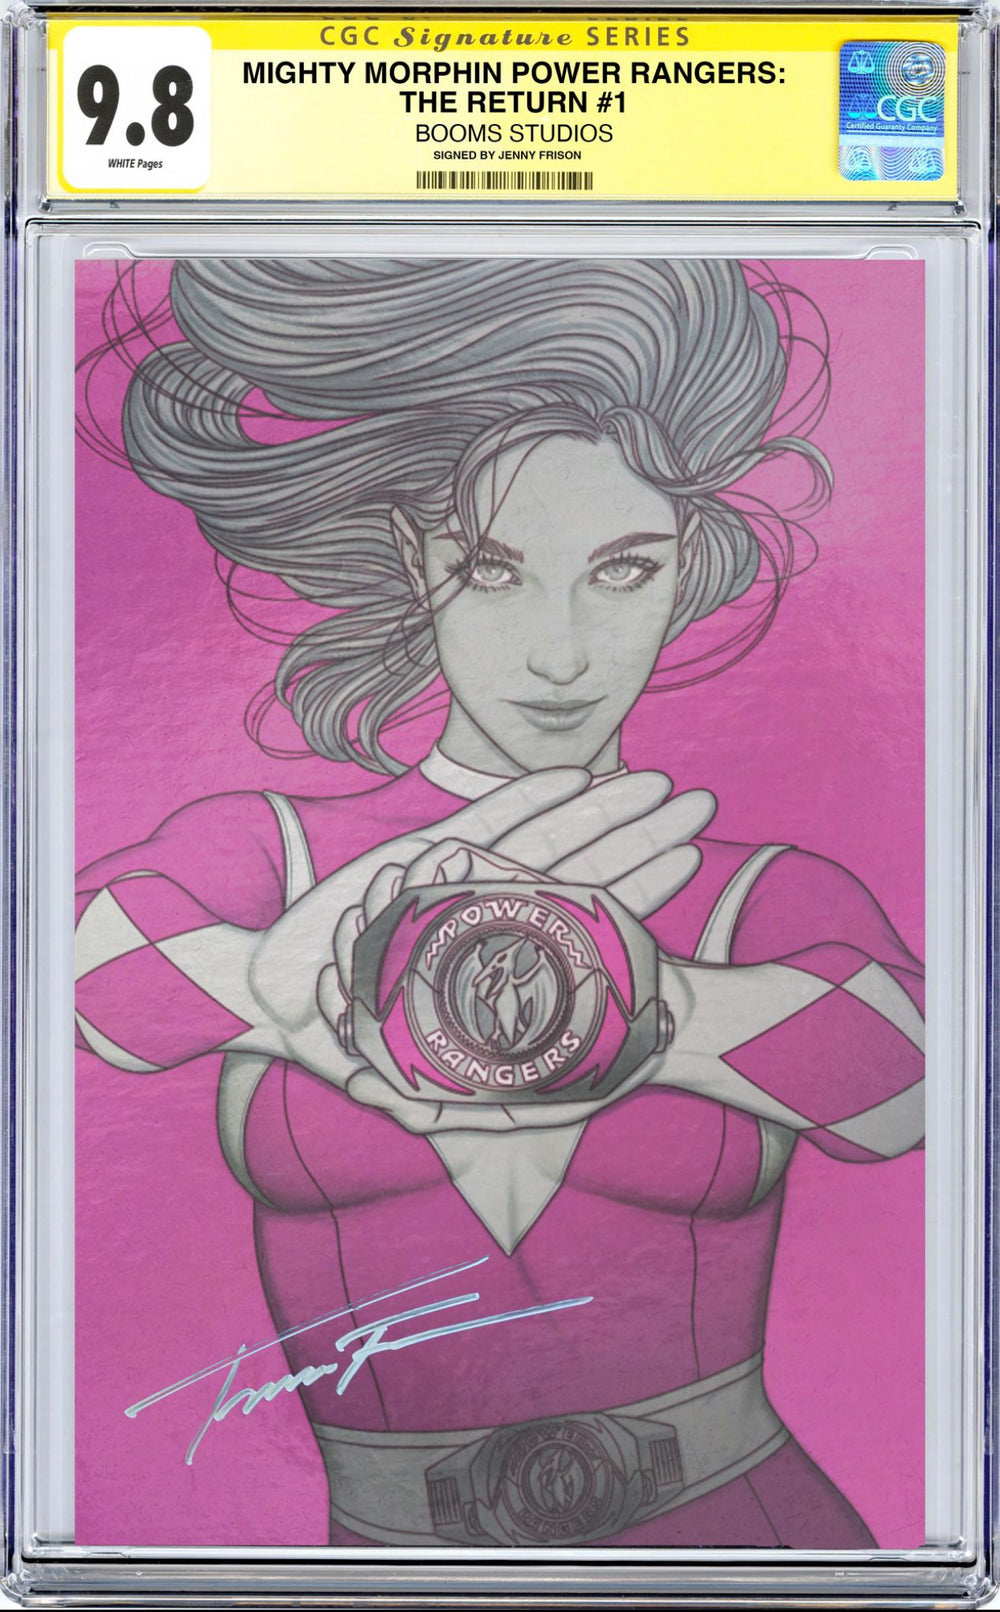 MIGHTY MORPHIN POWER RANGERS: THE RETURN #1 MEGACON EXCLUSIVE BY JENNY FRISON CGC SIGNATURE SERIES 9.8